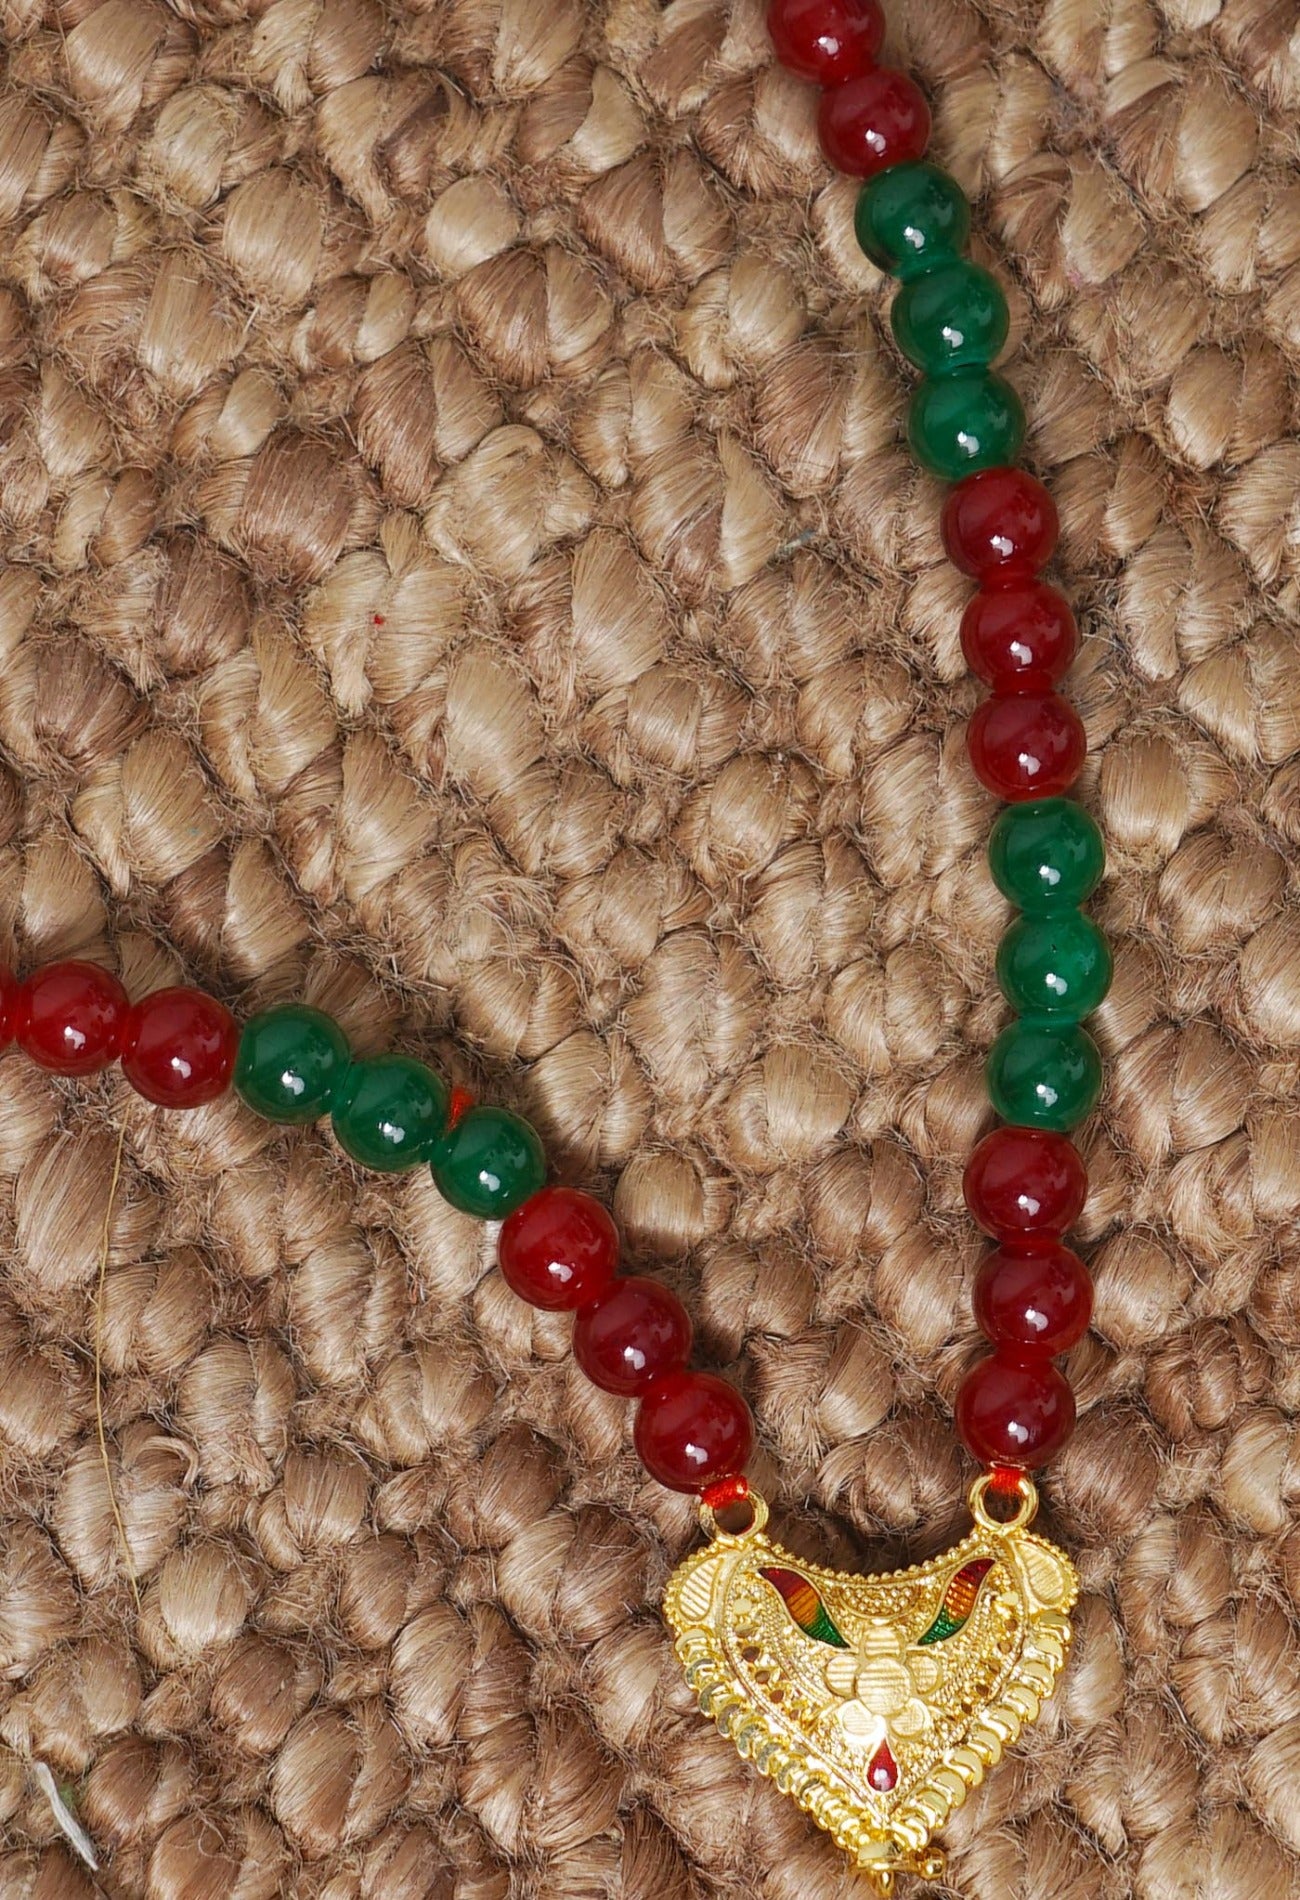 Red and Green Amravati Round Beads Necklace with Pendent-UJ408